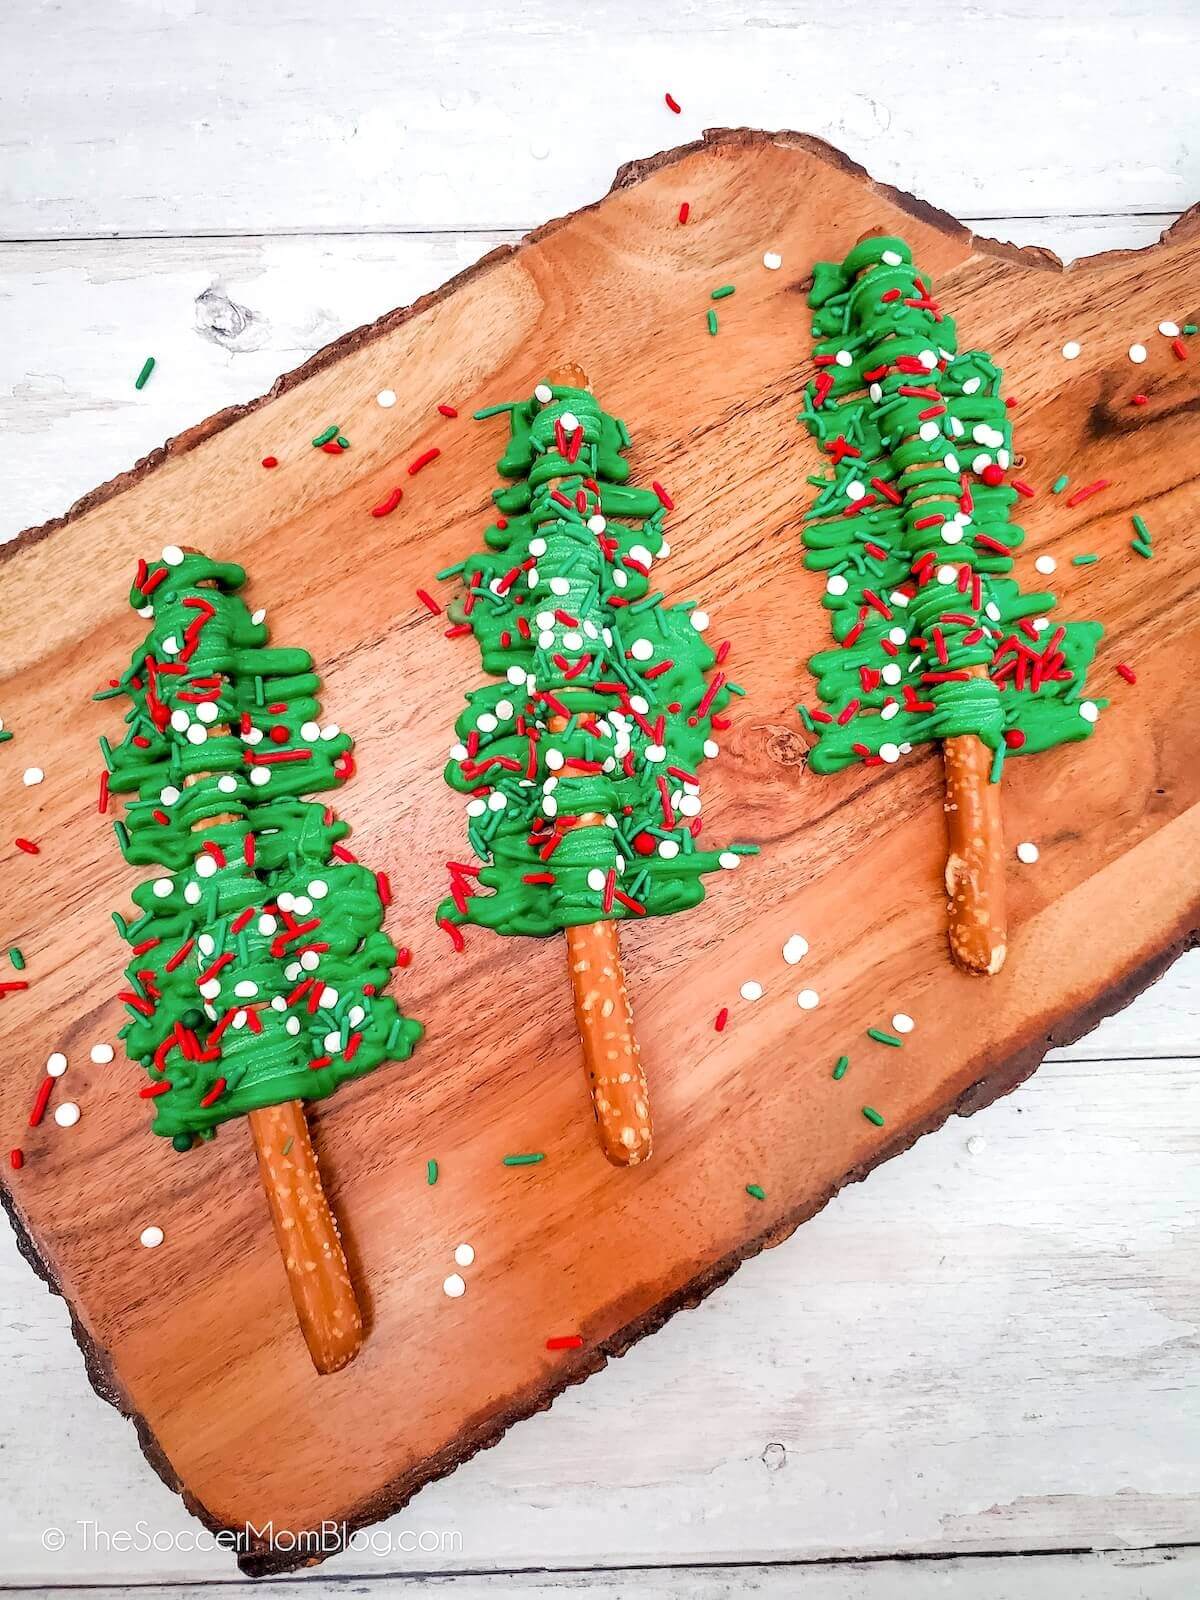 pretzel rods covered in melted green chocolate to look like Christmas trees.